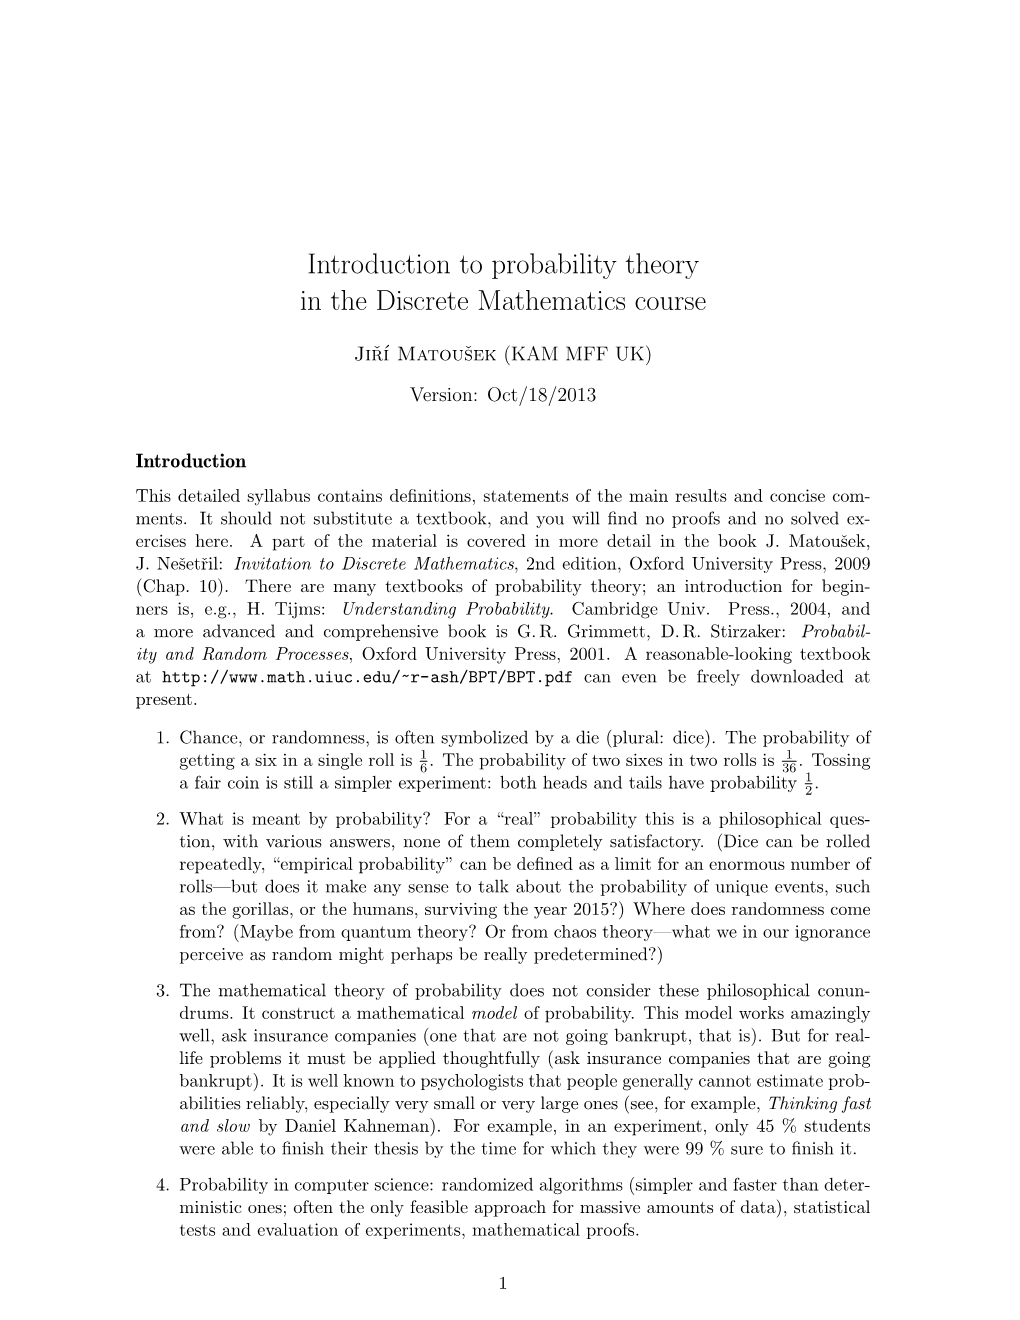 Introduction to Probability Theory in the Discrete Mathematics Course